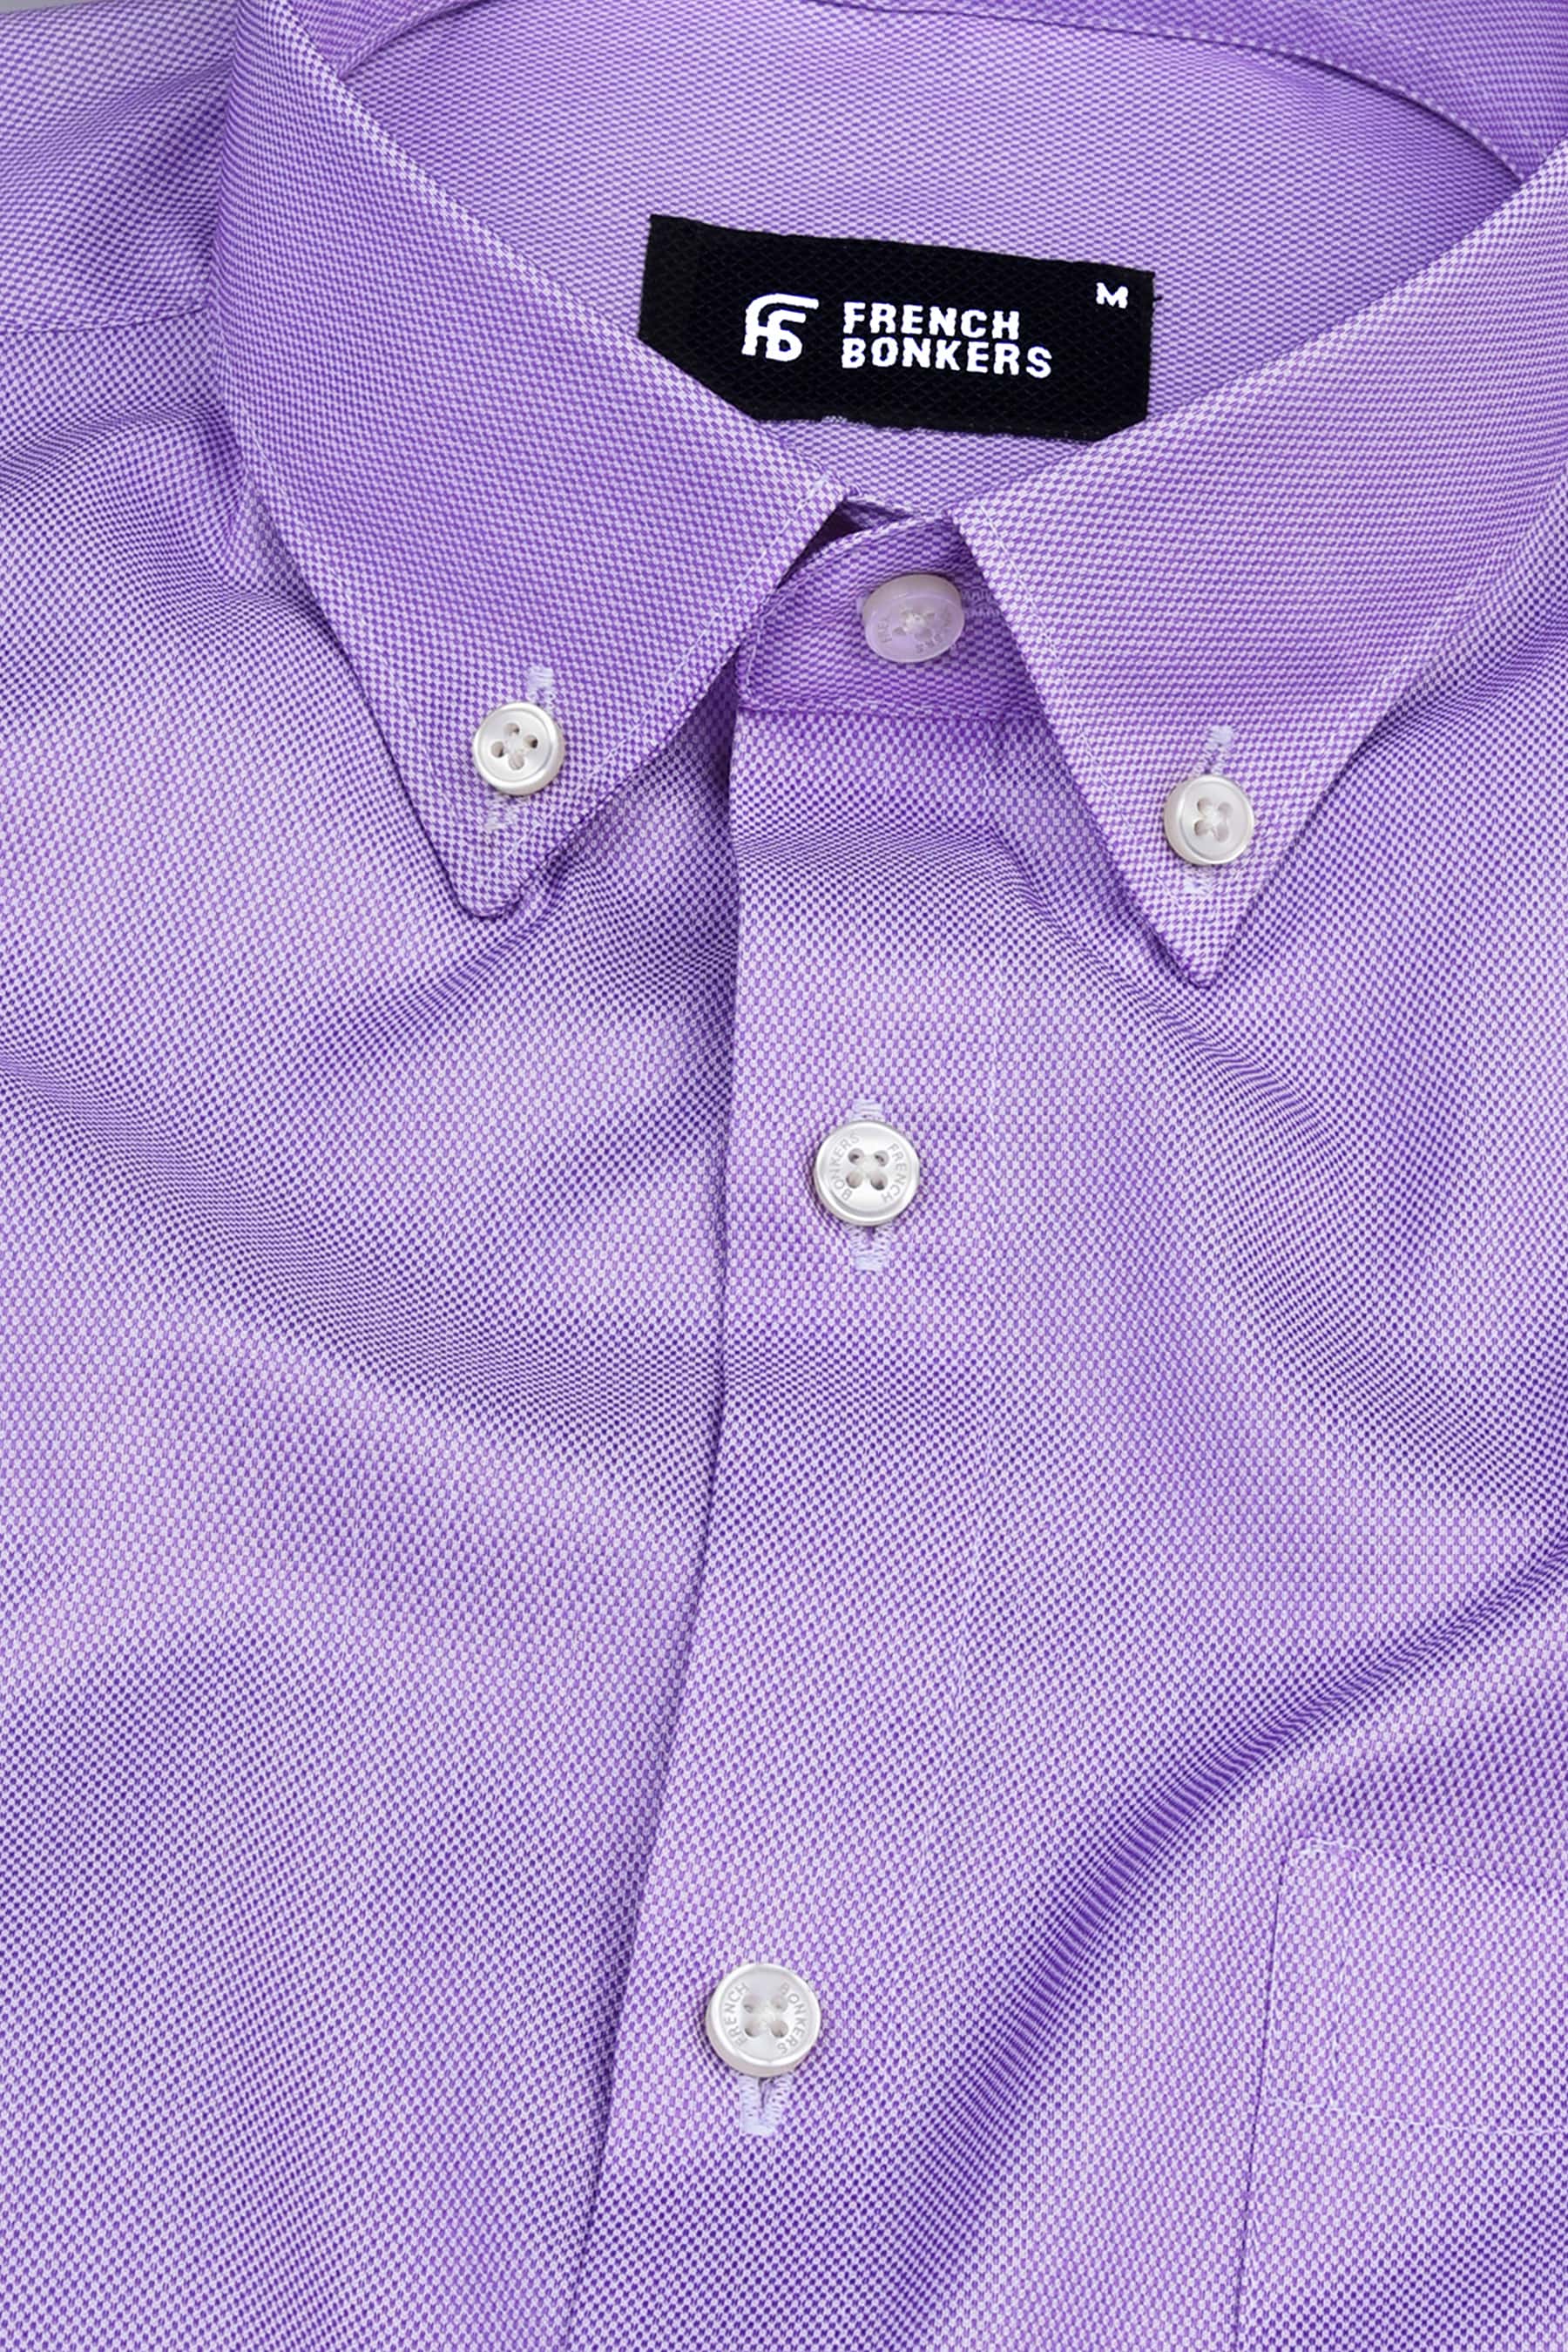 French violet dobby texture shirt